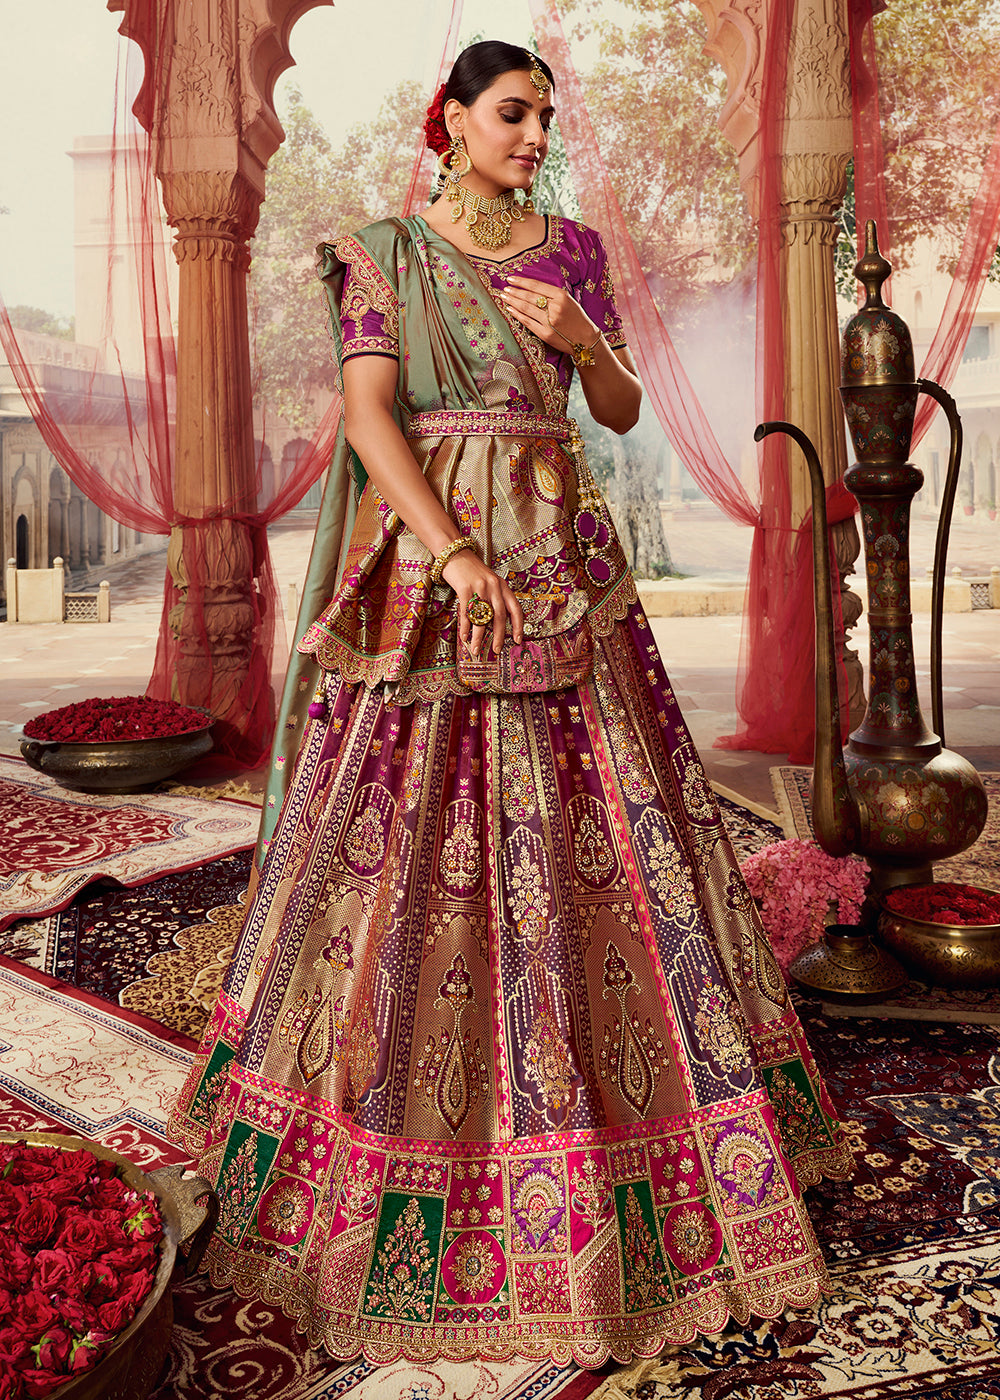 Buy Now Royal Multicolor Purple Embroidered Bridal Lehenga Choli Online in USA, UK, Canada & Worldwide at Empress Clothing. 